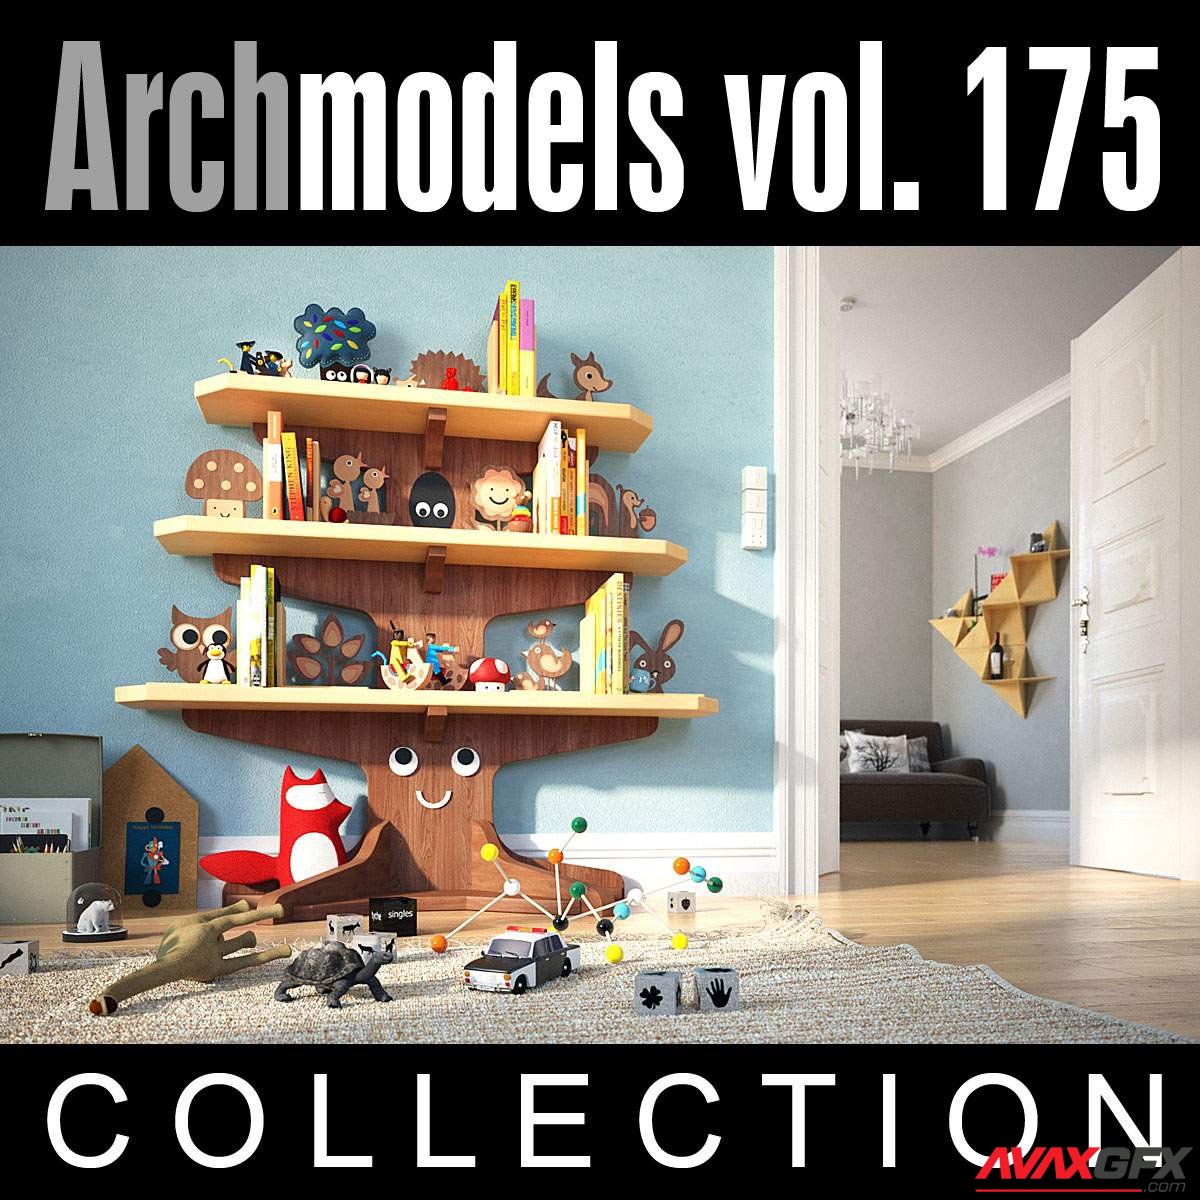 Evermotion Archmodels Vol. 175